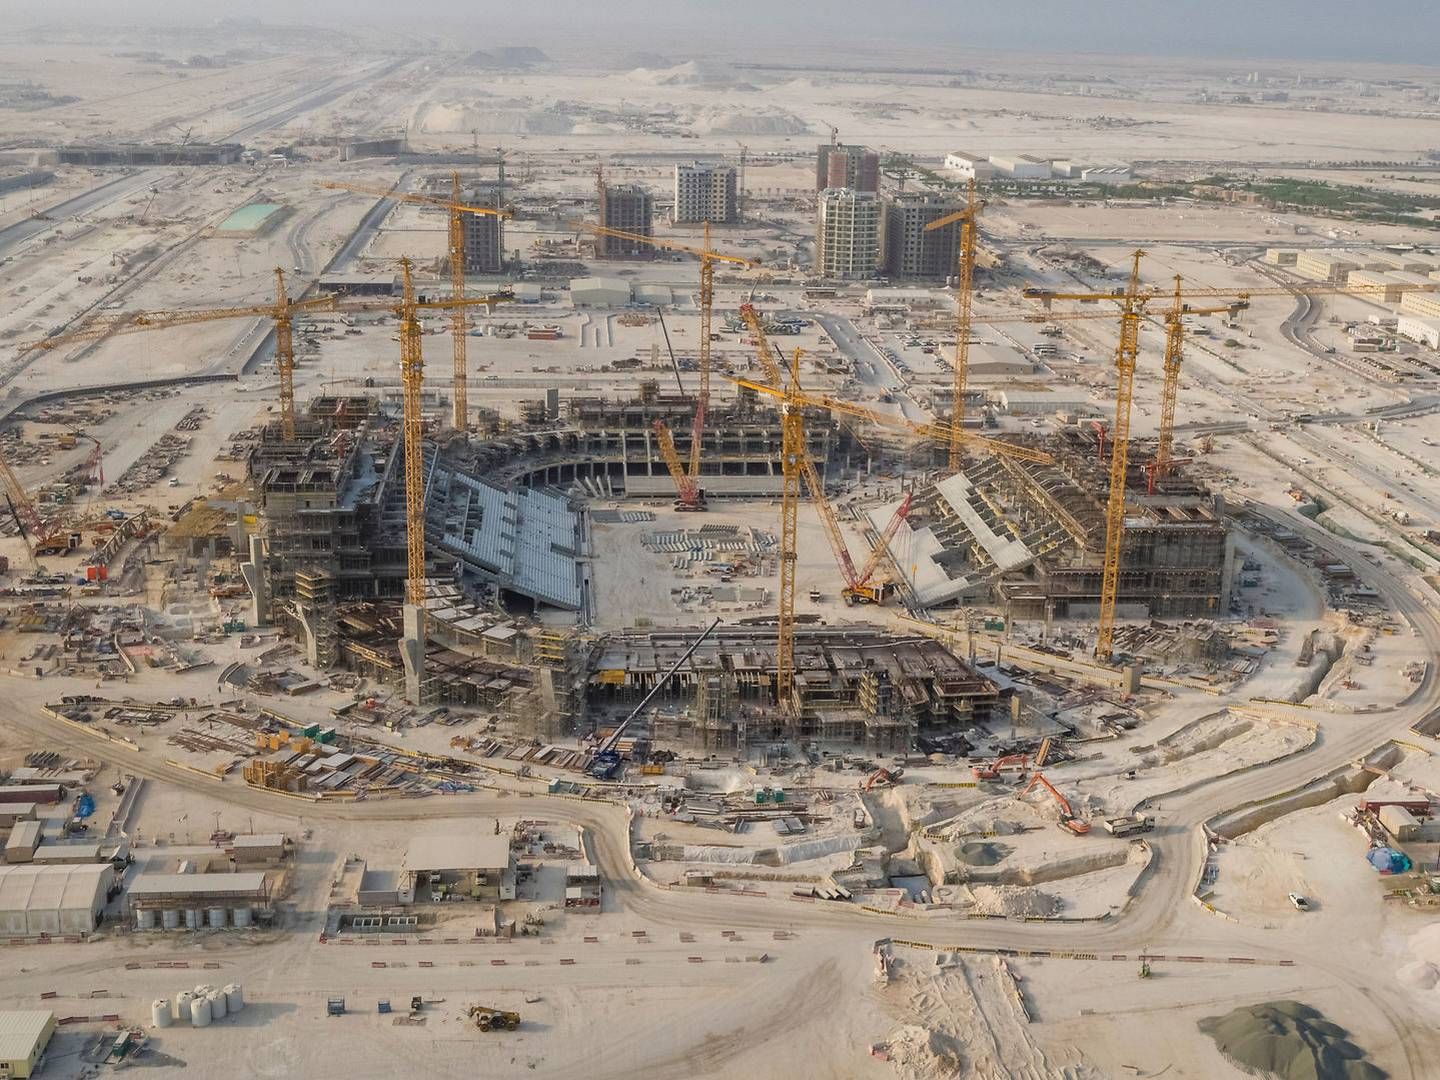 Qatar has been heavily criticized by both sporting and human rights associations over the working conditions at the world cup stadium construction site. | Photo: Handout/Reuters/Ritzau Scanpix